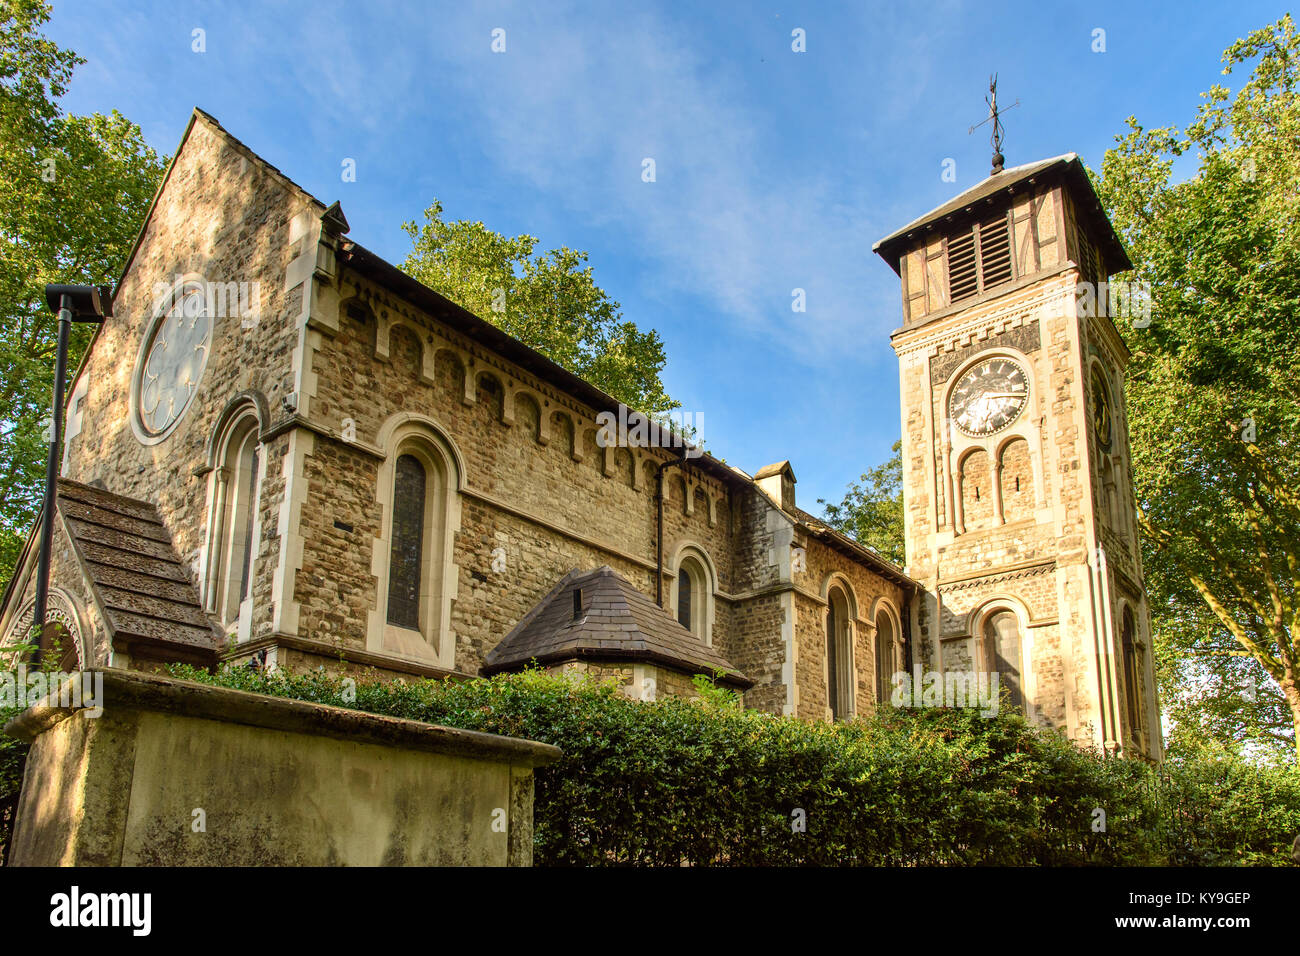 London, England - July 25, 2016: St Pancras Old Church in Camden, north London. Stock Photo